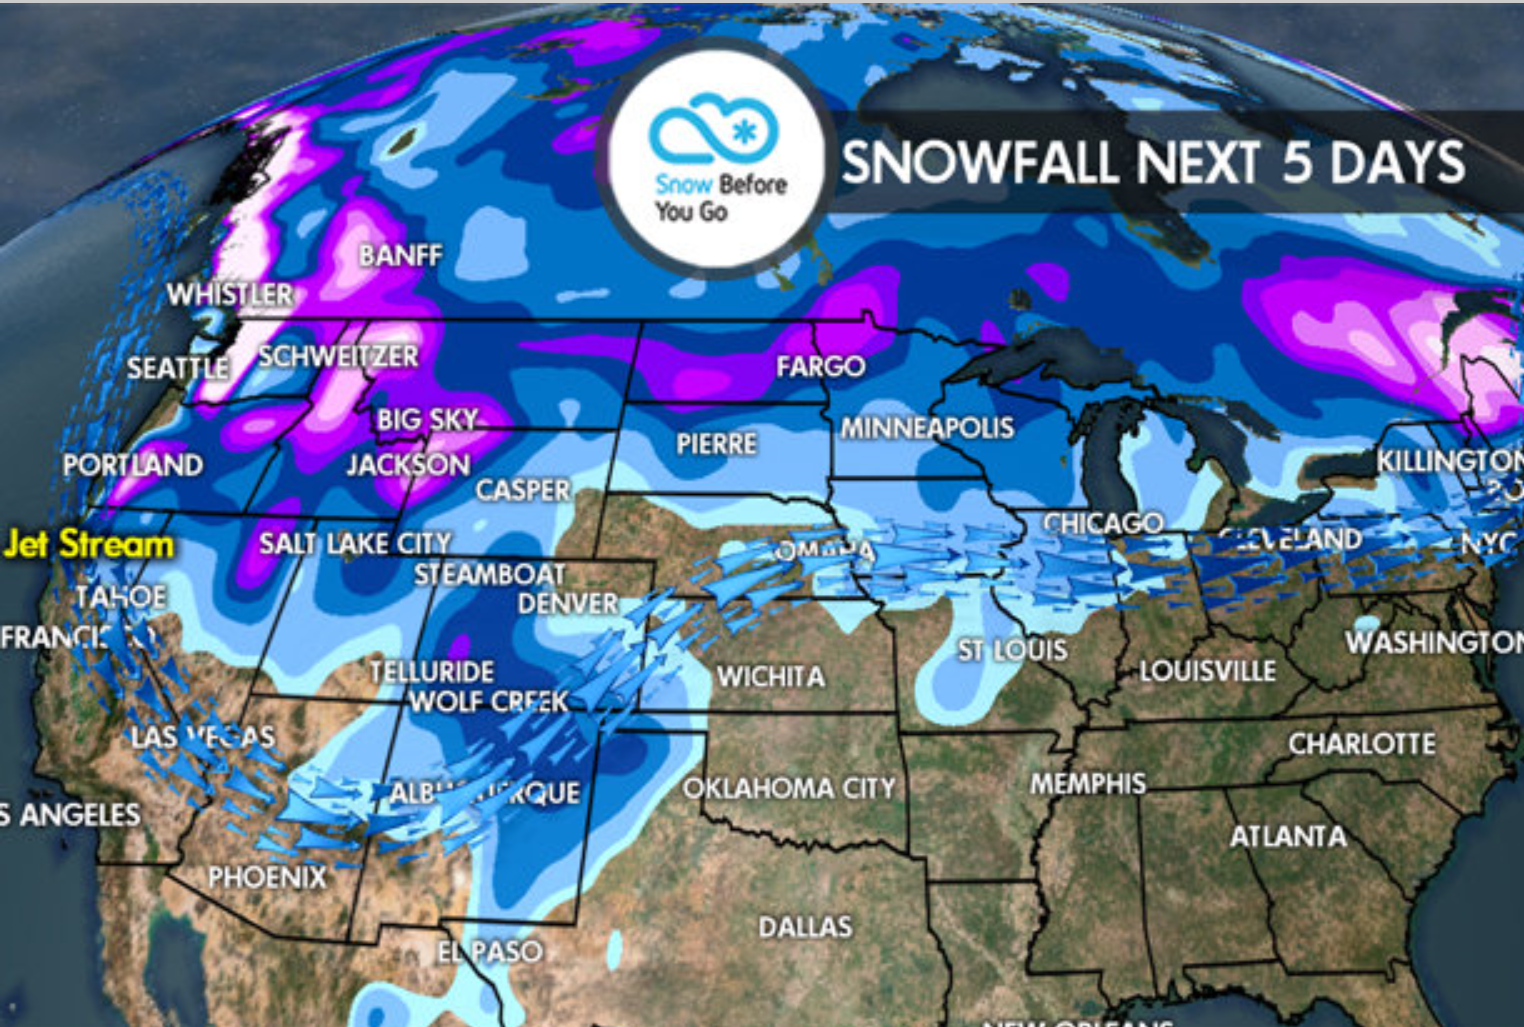 The snowfall forecast is looking GOOD! PC: Chris Tomer